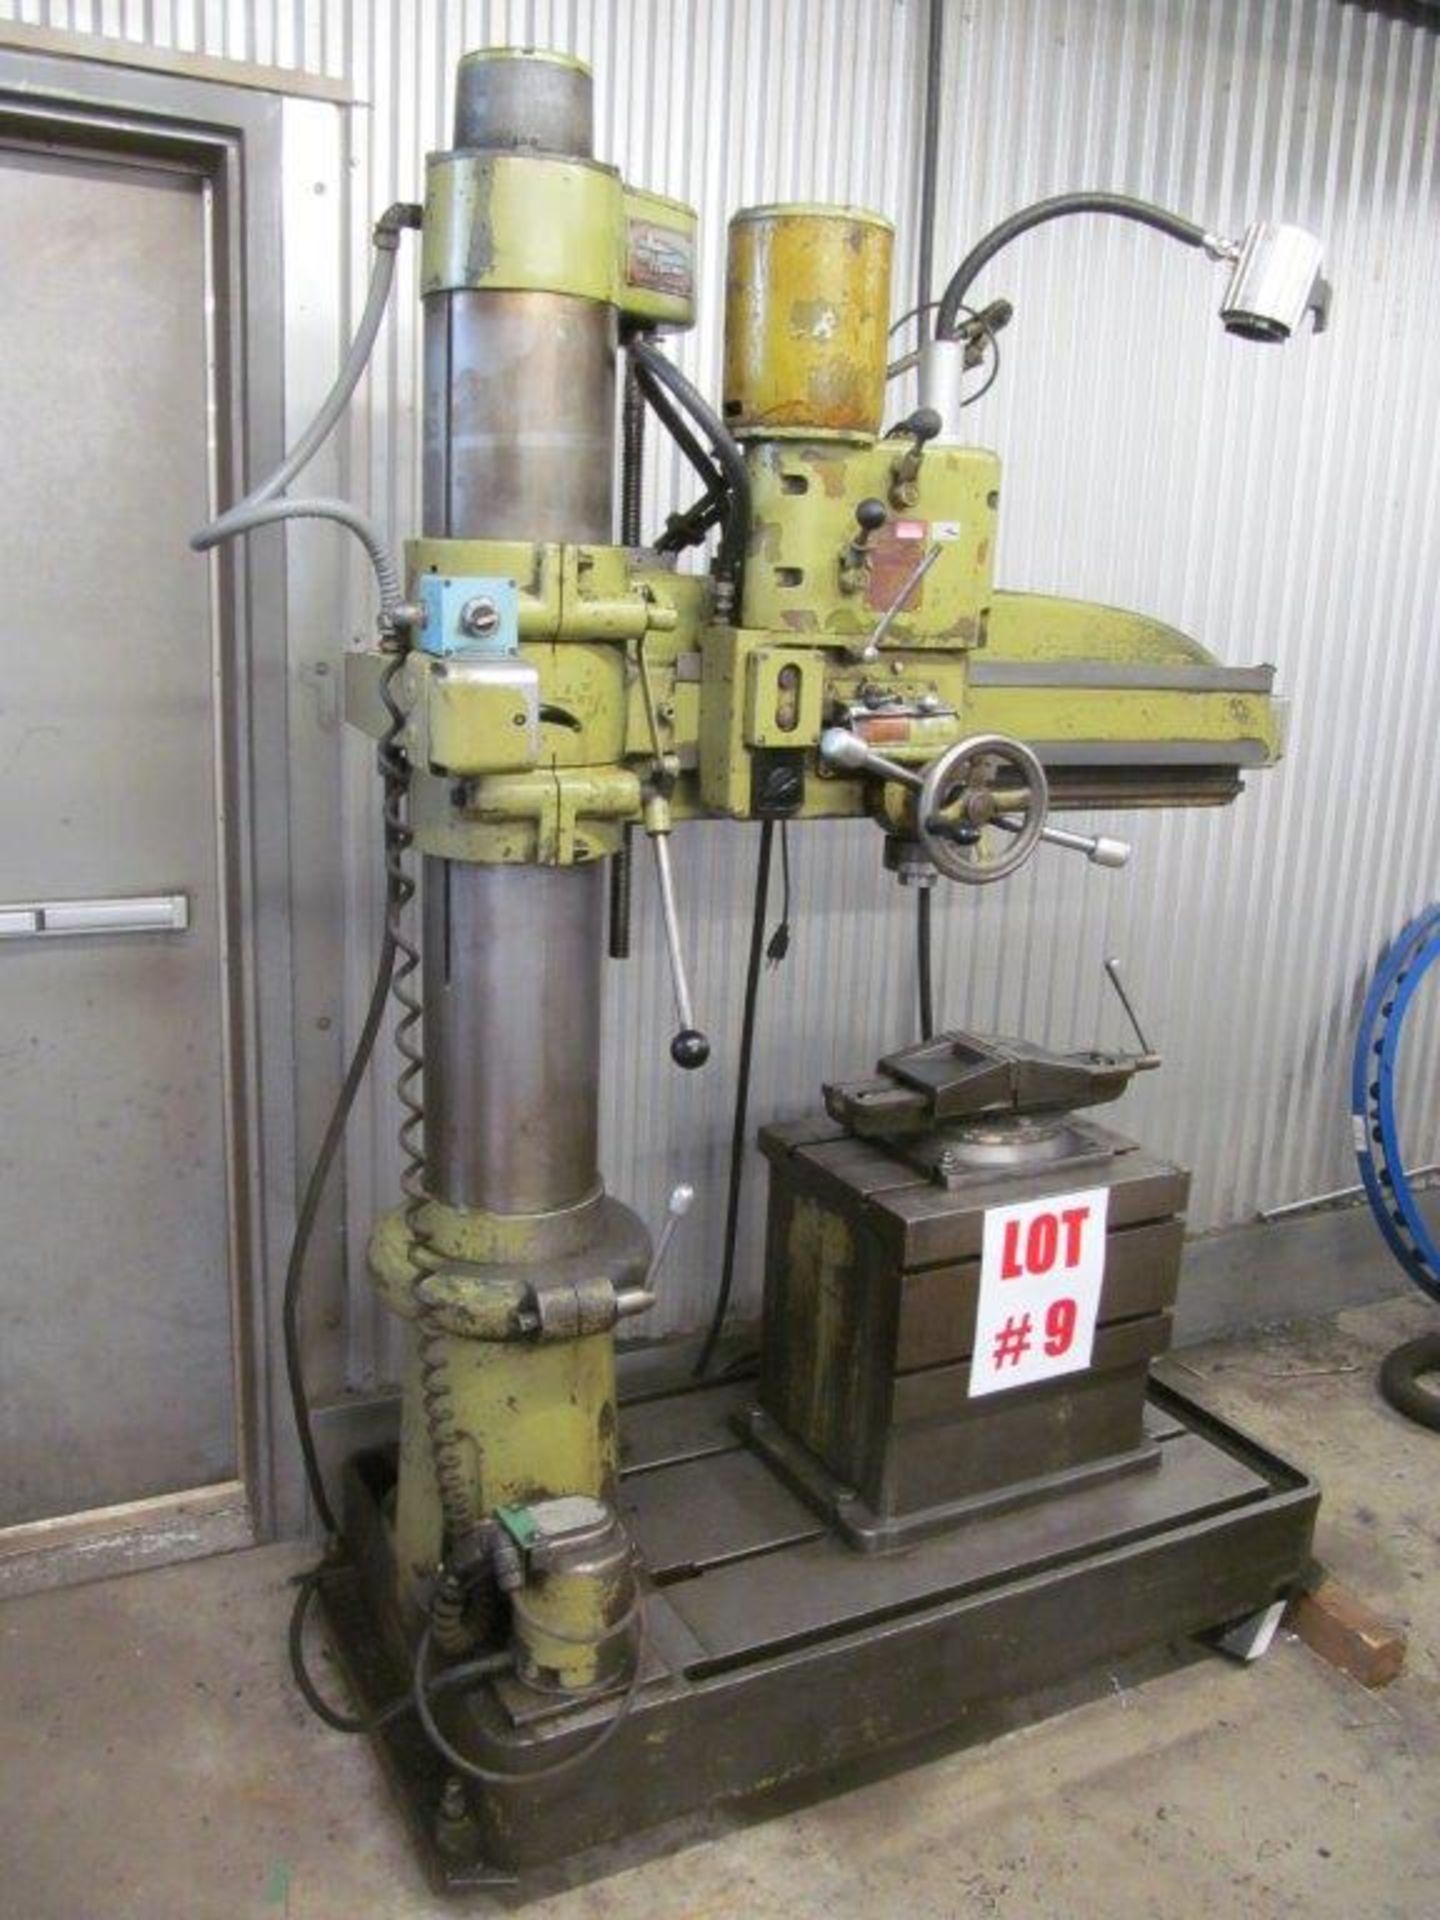 ARBOGA (SWEDEN) RADIAL ARM DRILL, 3 FT ARM, MODEL: MH, S/N: 98090, C/W BOX TABLE 16" X 20" X 19-1/2"